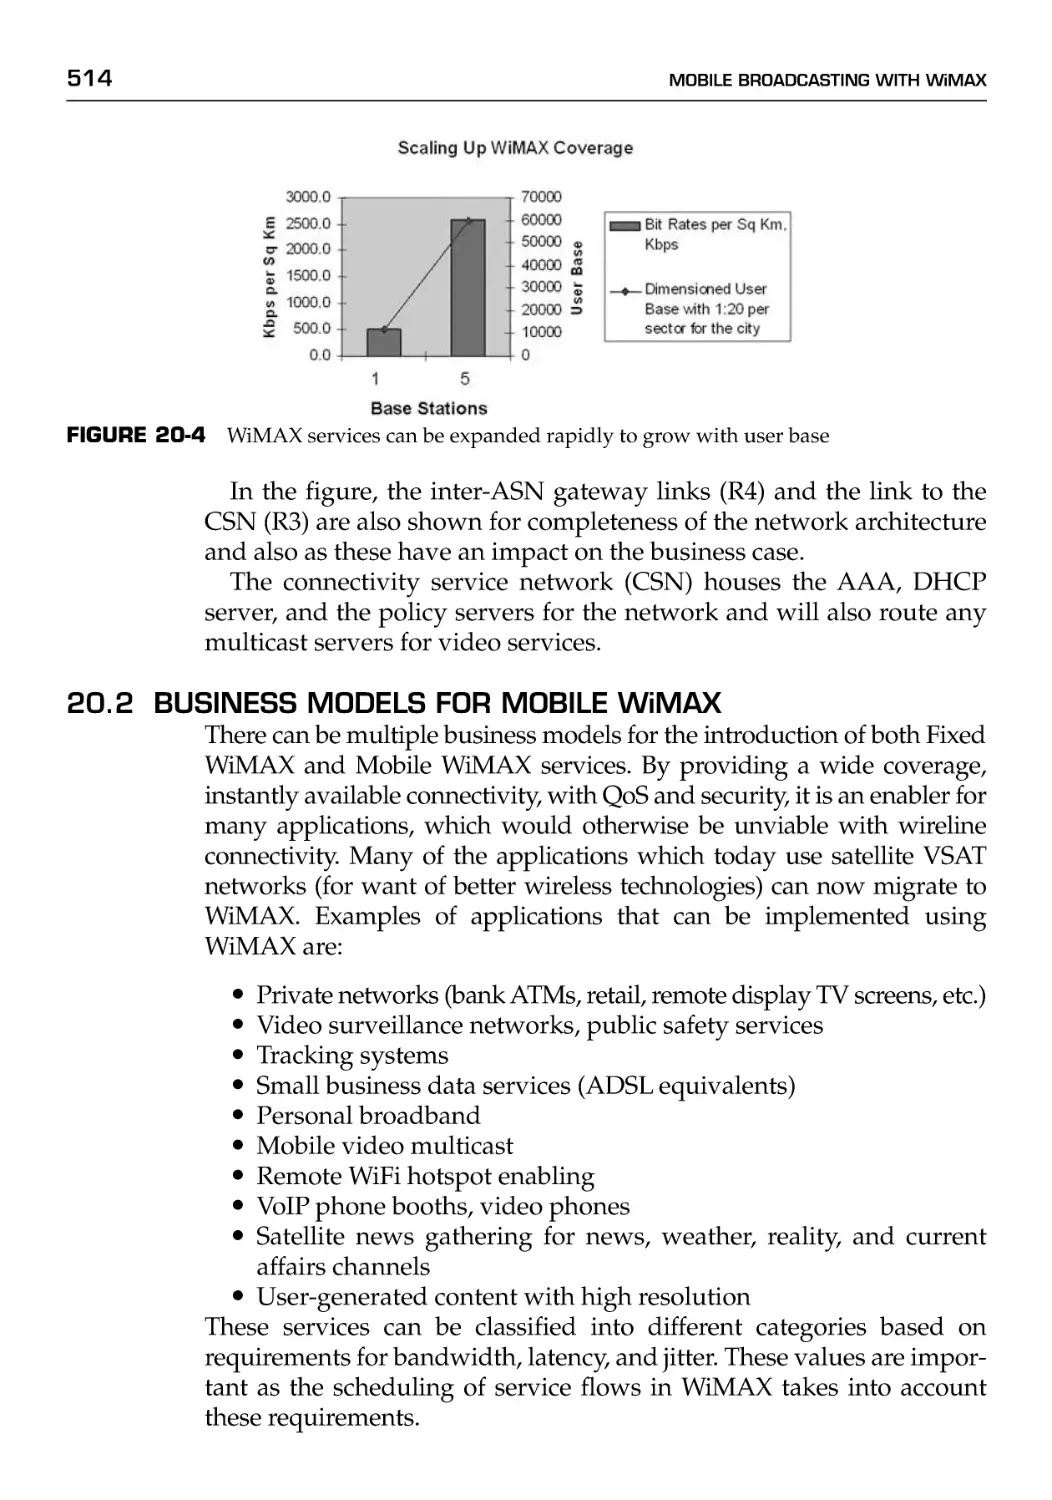 20.2 Business Models for Mobile WiMAX